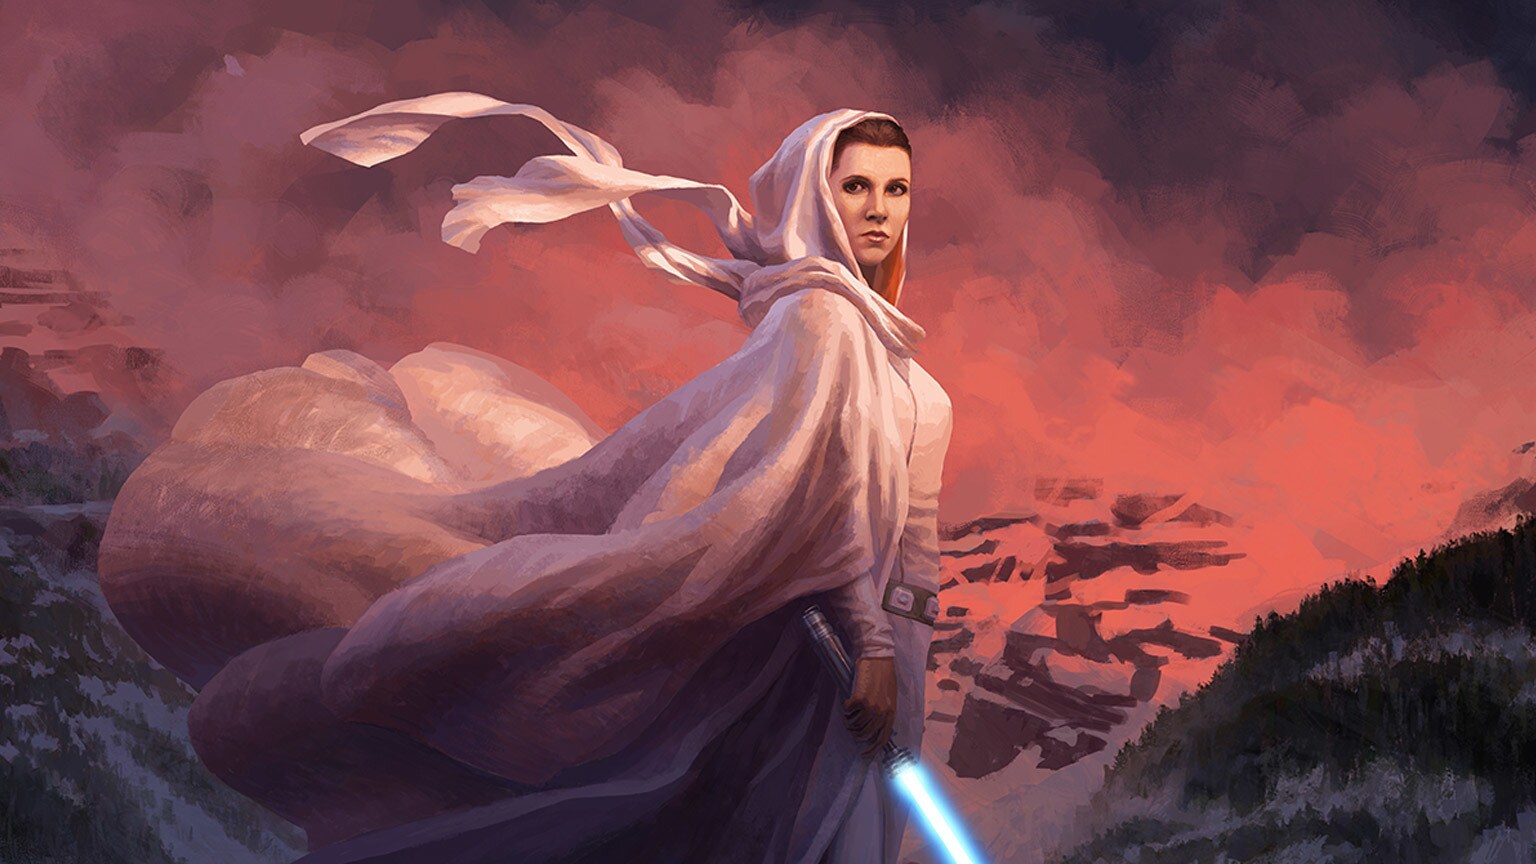 Leia Ignites Her Lightsaber in a Dreamlike New Print from Acme Archives - Exclusive Reveal